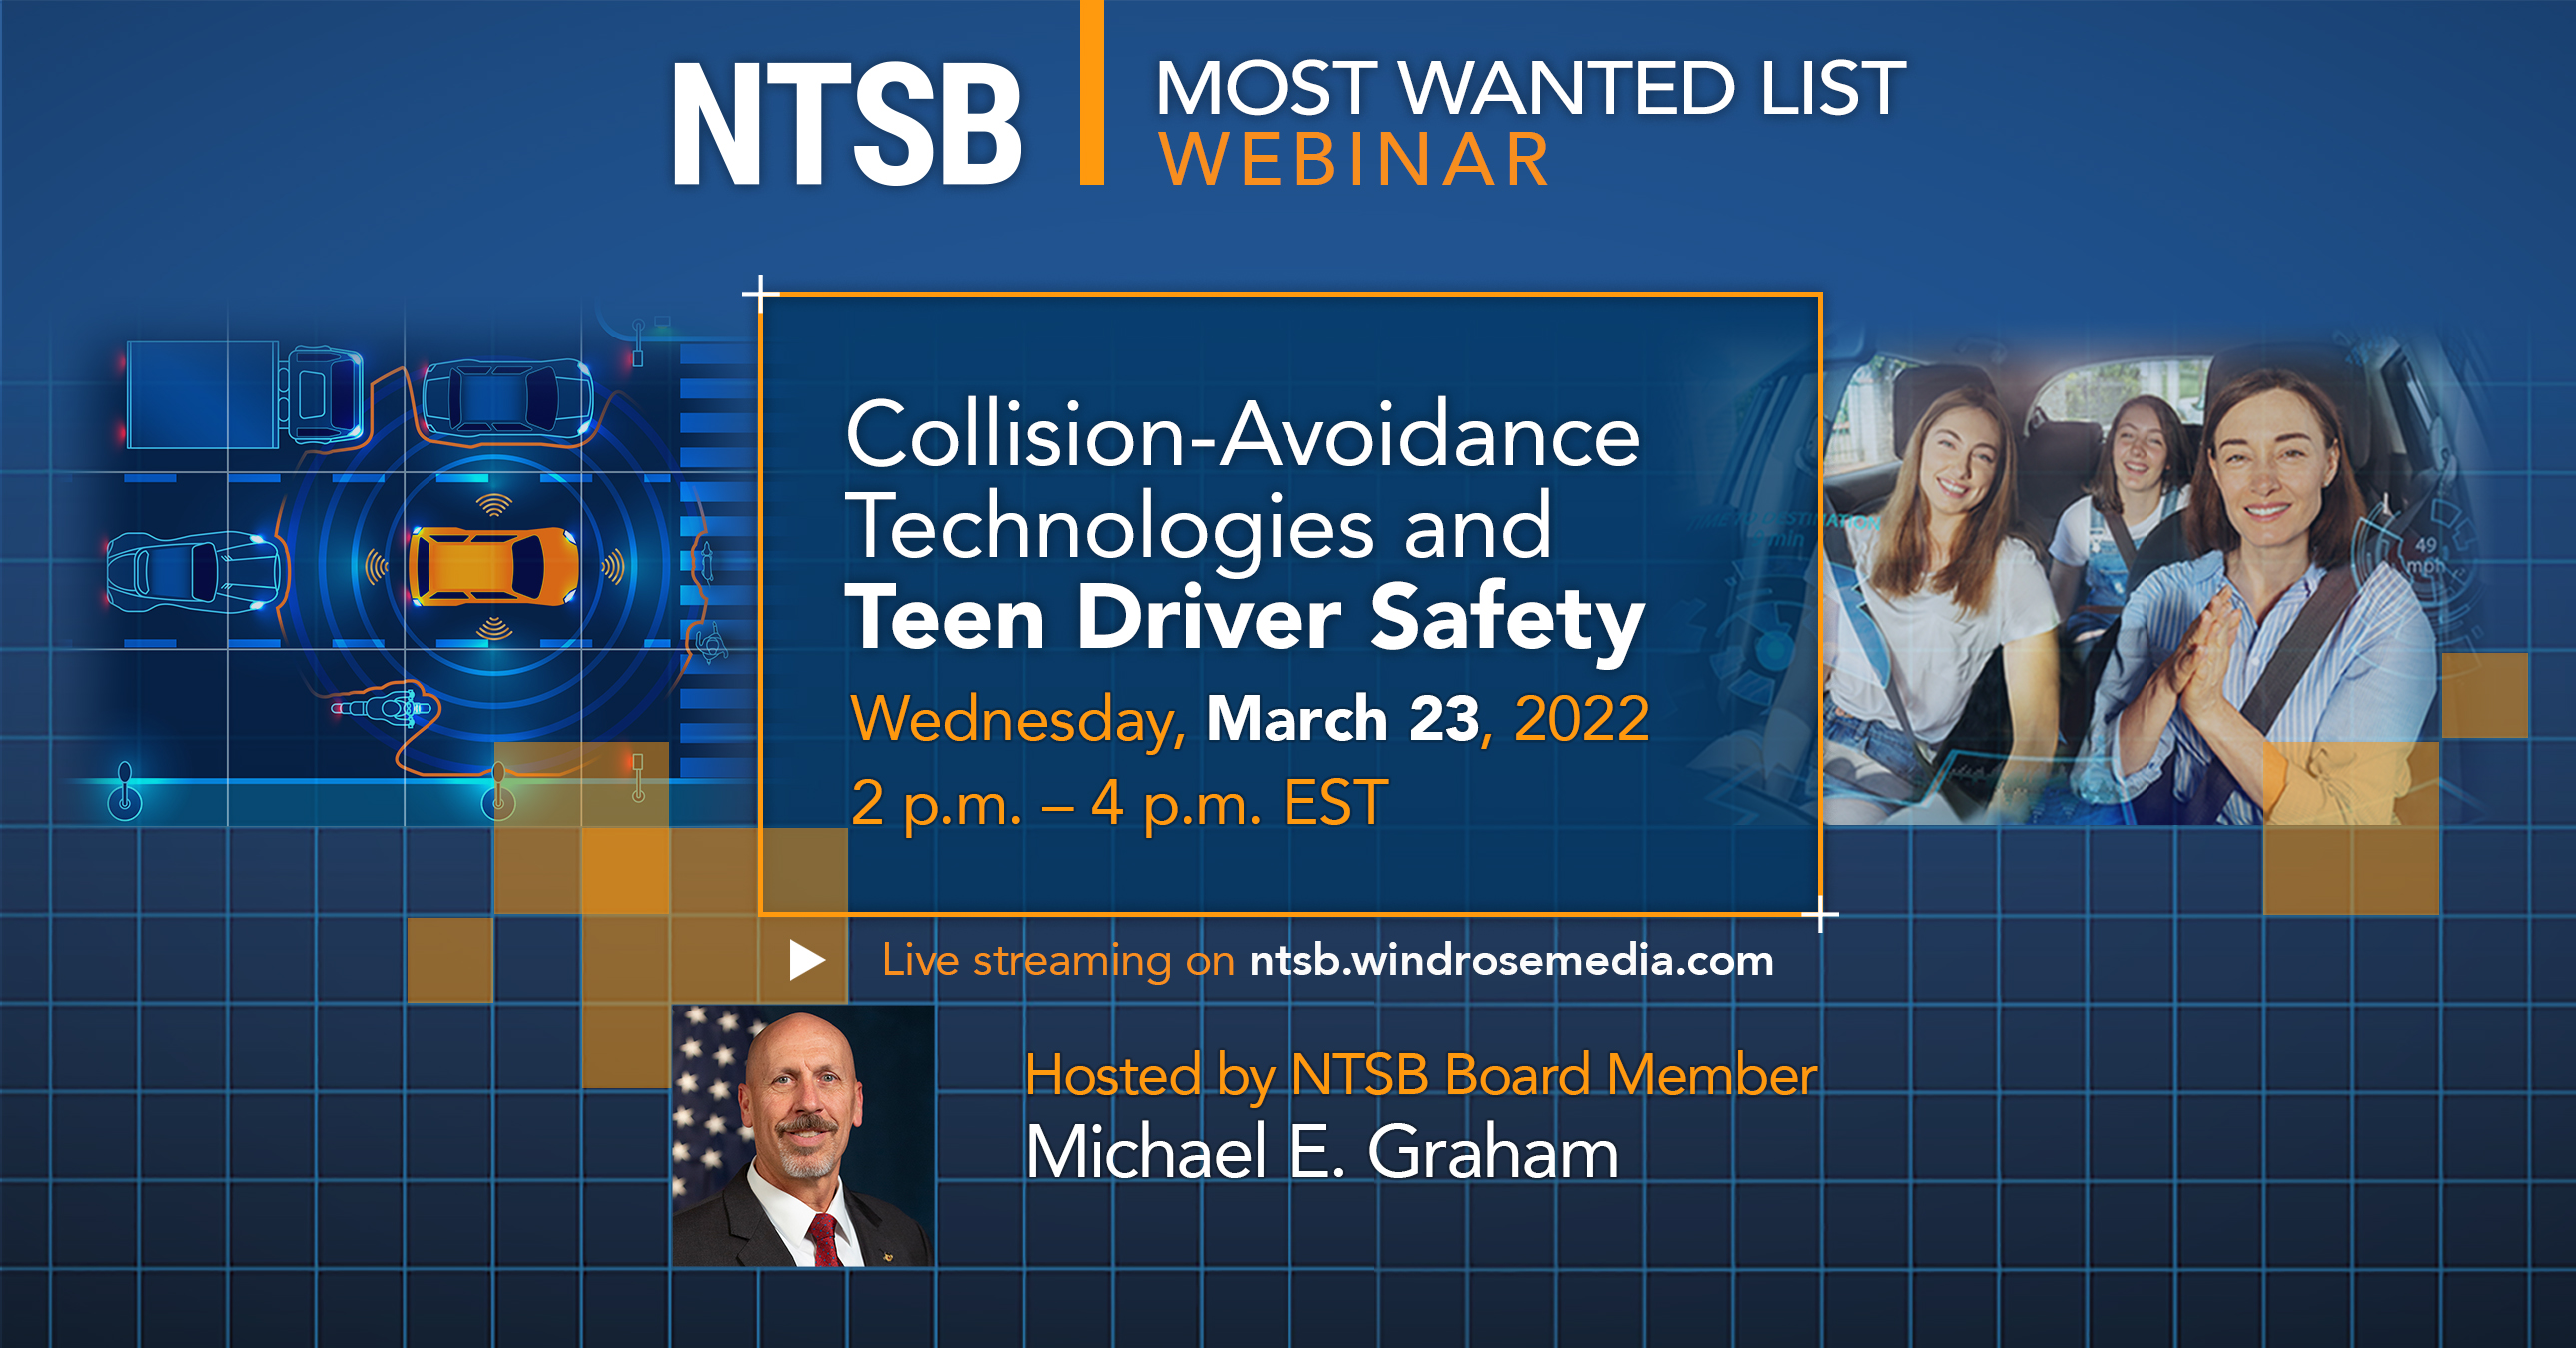 NTSB MWL Webinar: Collision-Avoidance Technologies and Teen Driver Safety